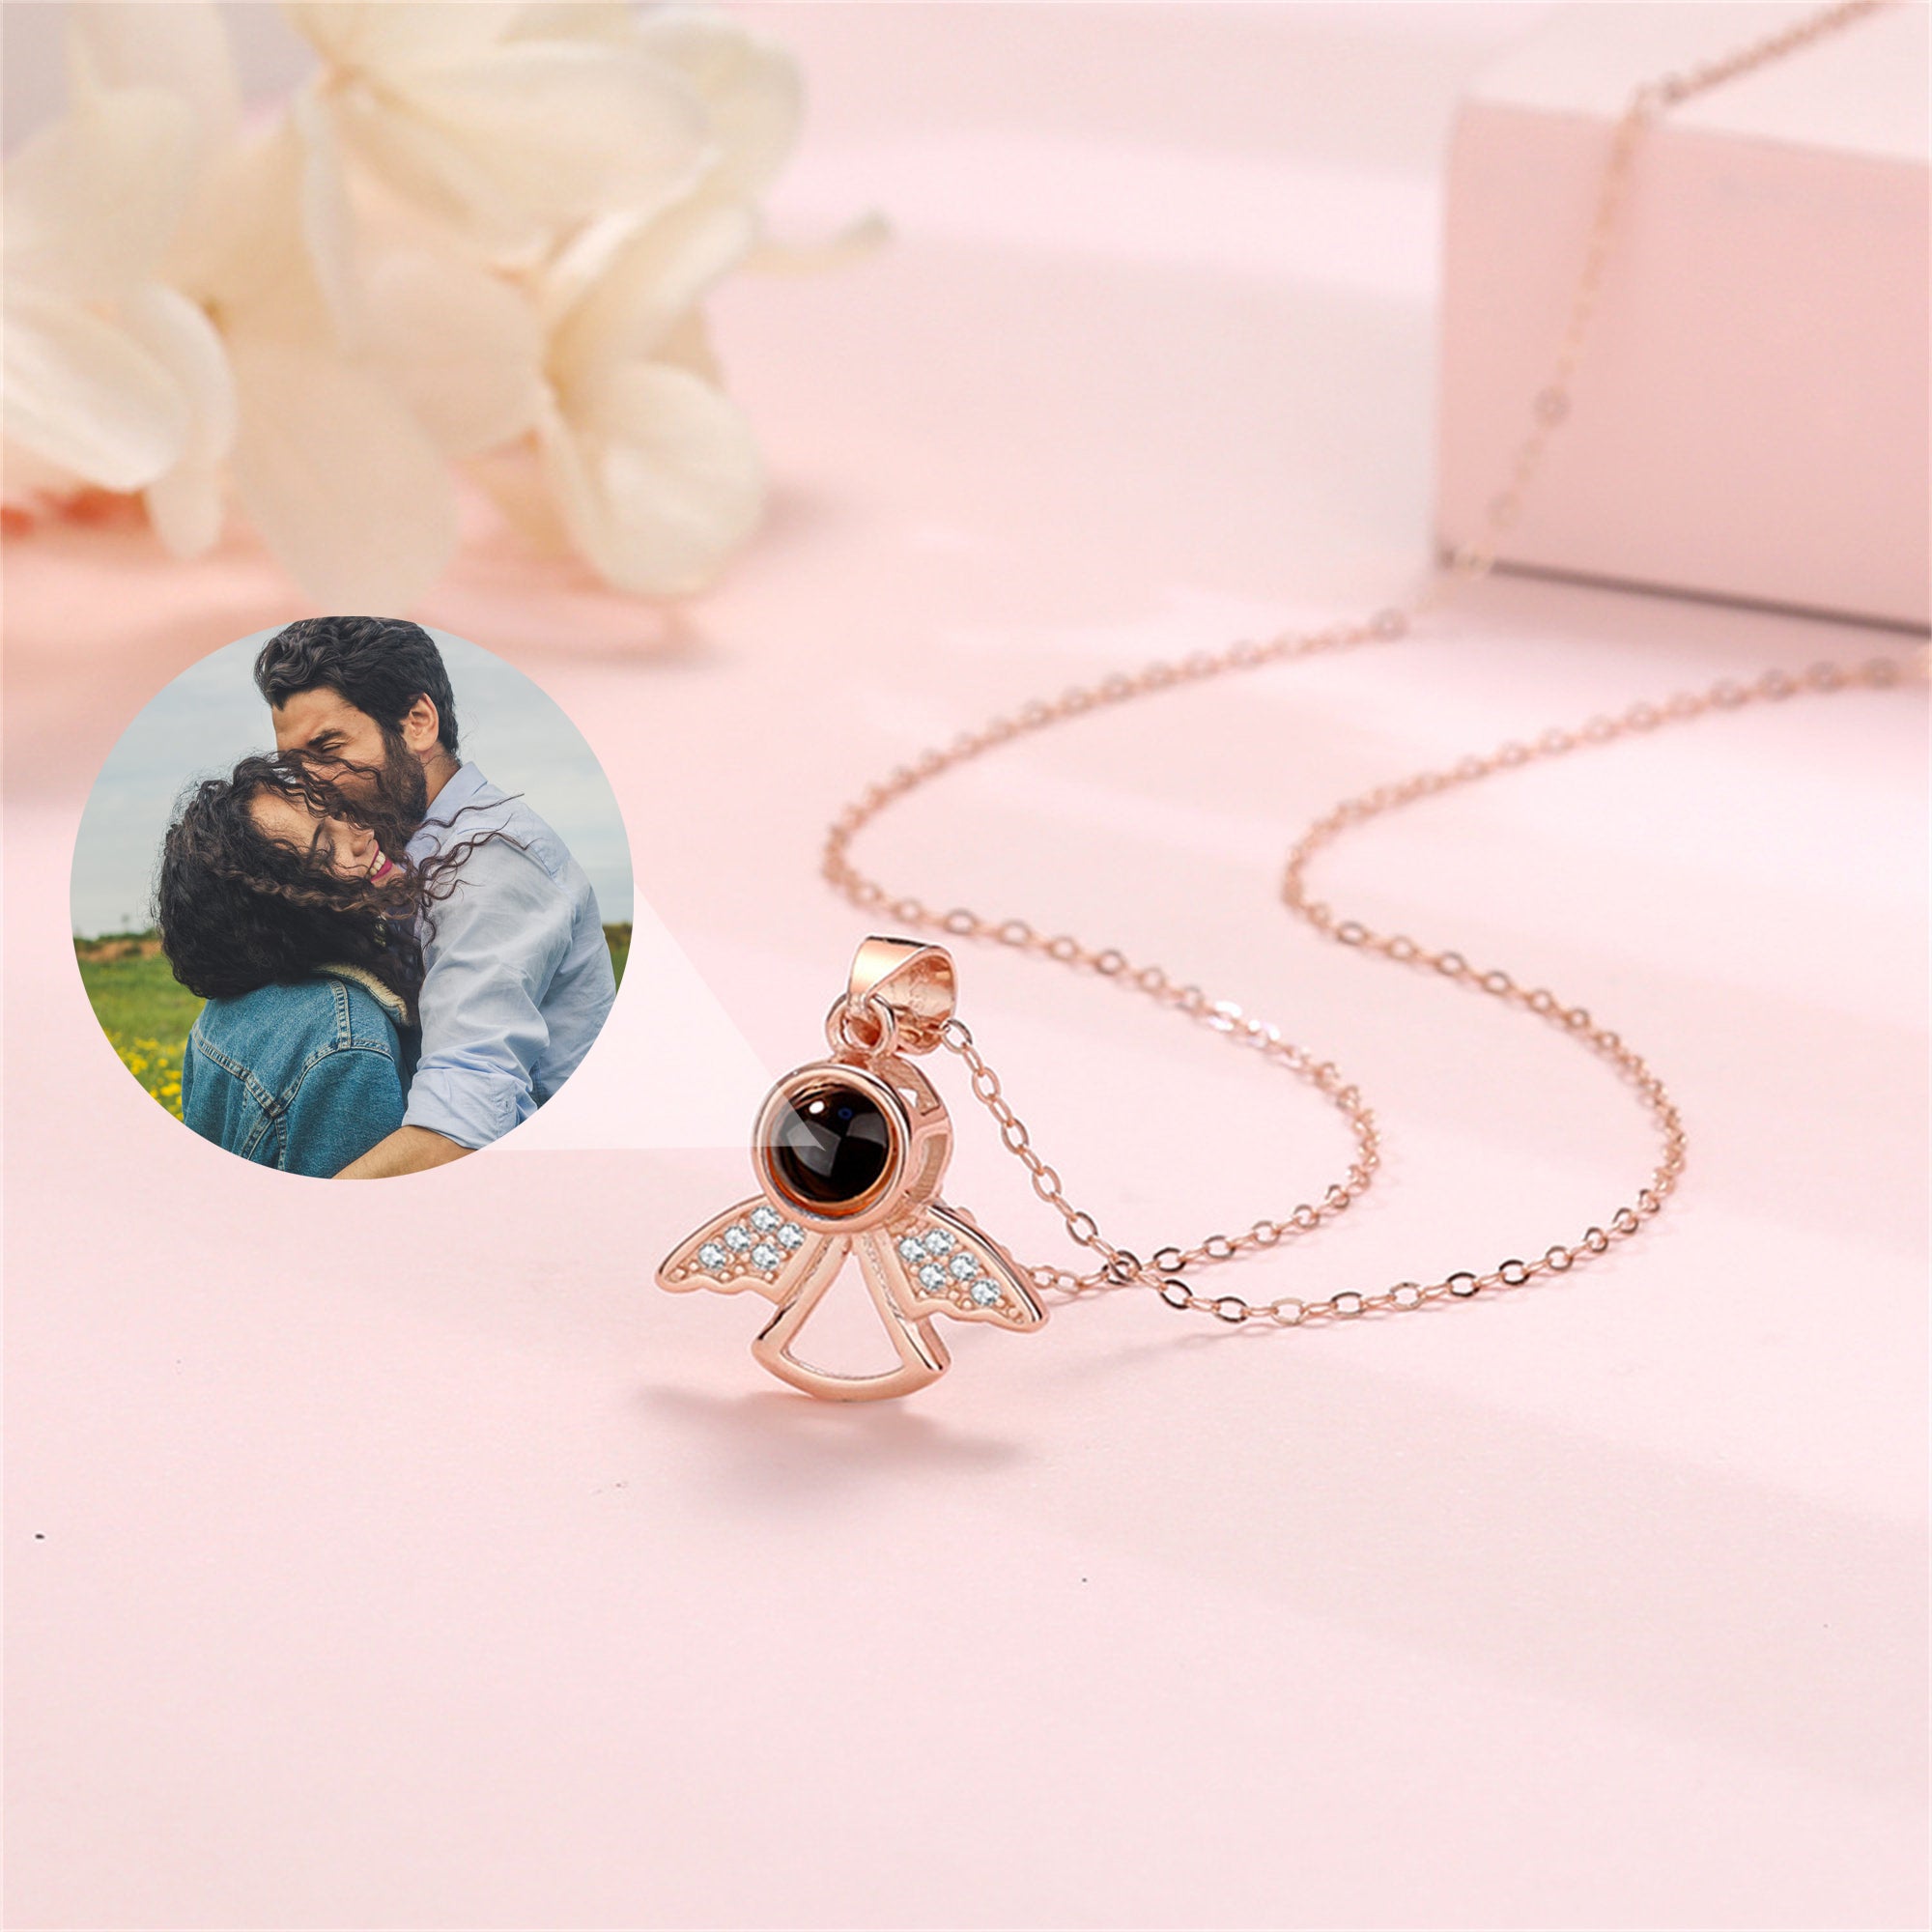 Personalized Angel Projection Picture Necklace, Custom Memorial Photo Pendant